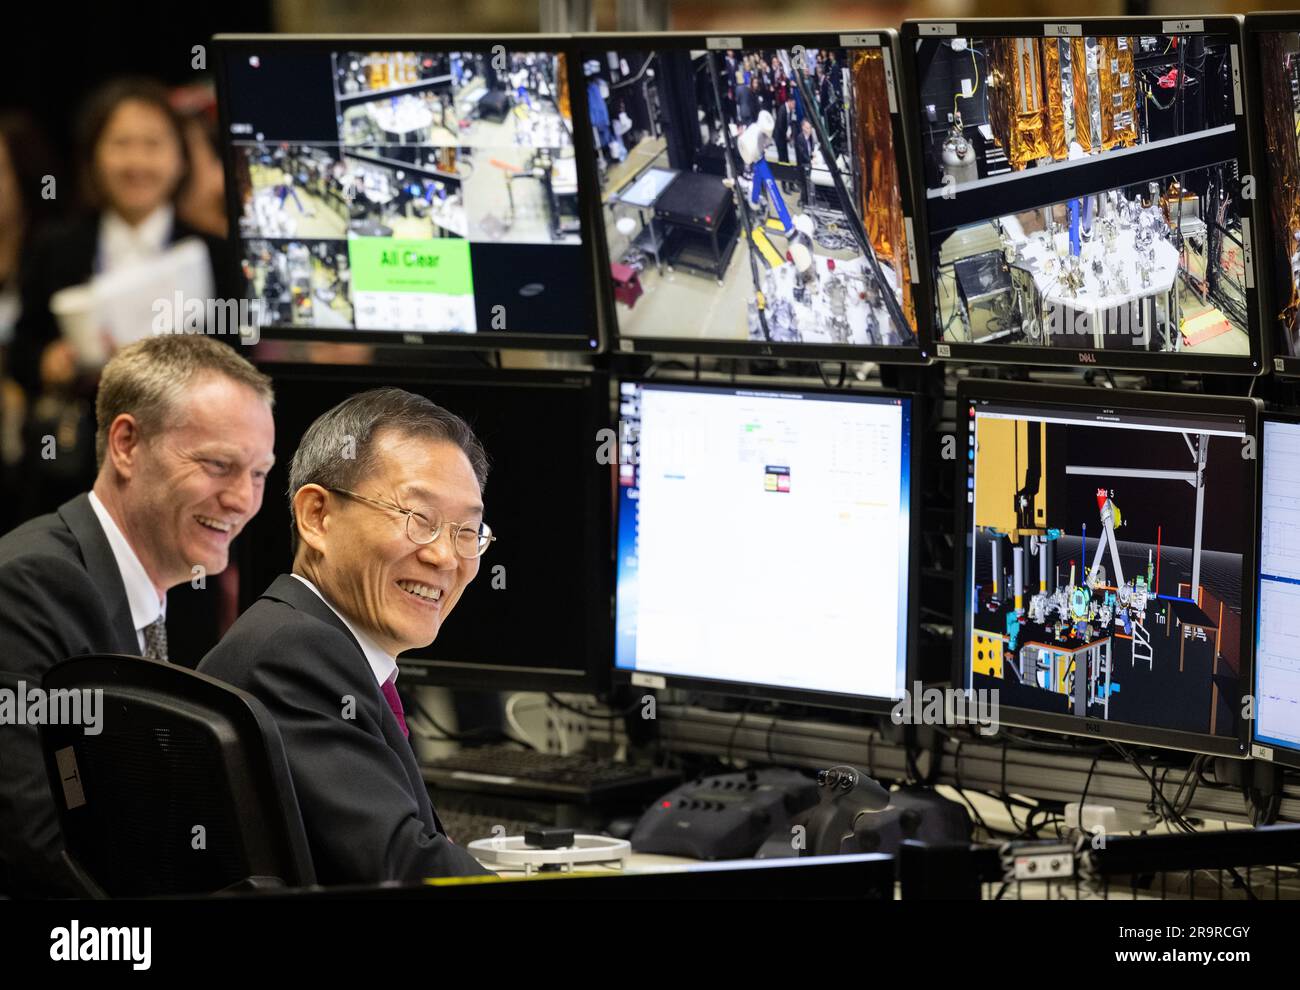 Vice President Harris and President Yoon at GSFC. Joe Easley, robotics demonstration and test engineer at NASA’s Goddard Space Flight Center, left, is seen with MSIT Minister Jong-Ho Lee as he uses a controller to manipulate one of the robotic arms at the Robot Operations Center (ROC), Tuesday, April 25, 2023, during a tour of NASA’s Goddard Space Flight Center in Greenbelt, Md. Stock Photo